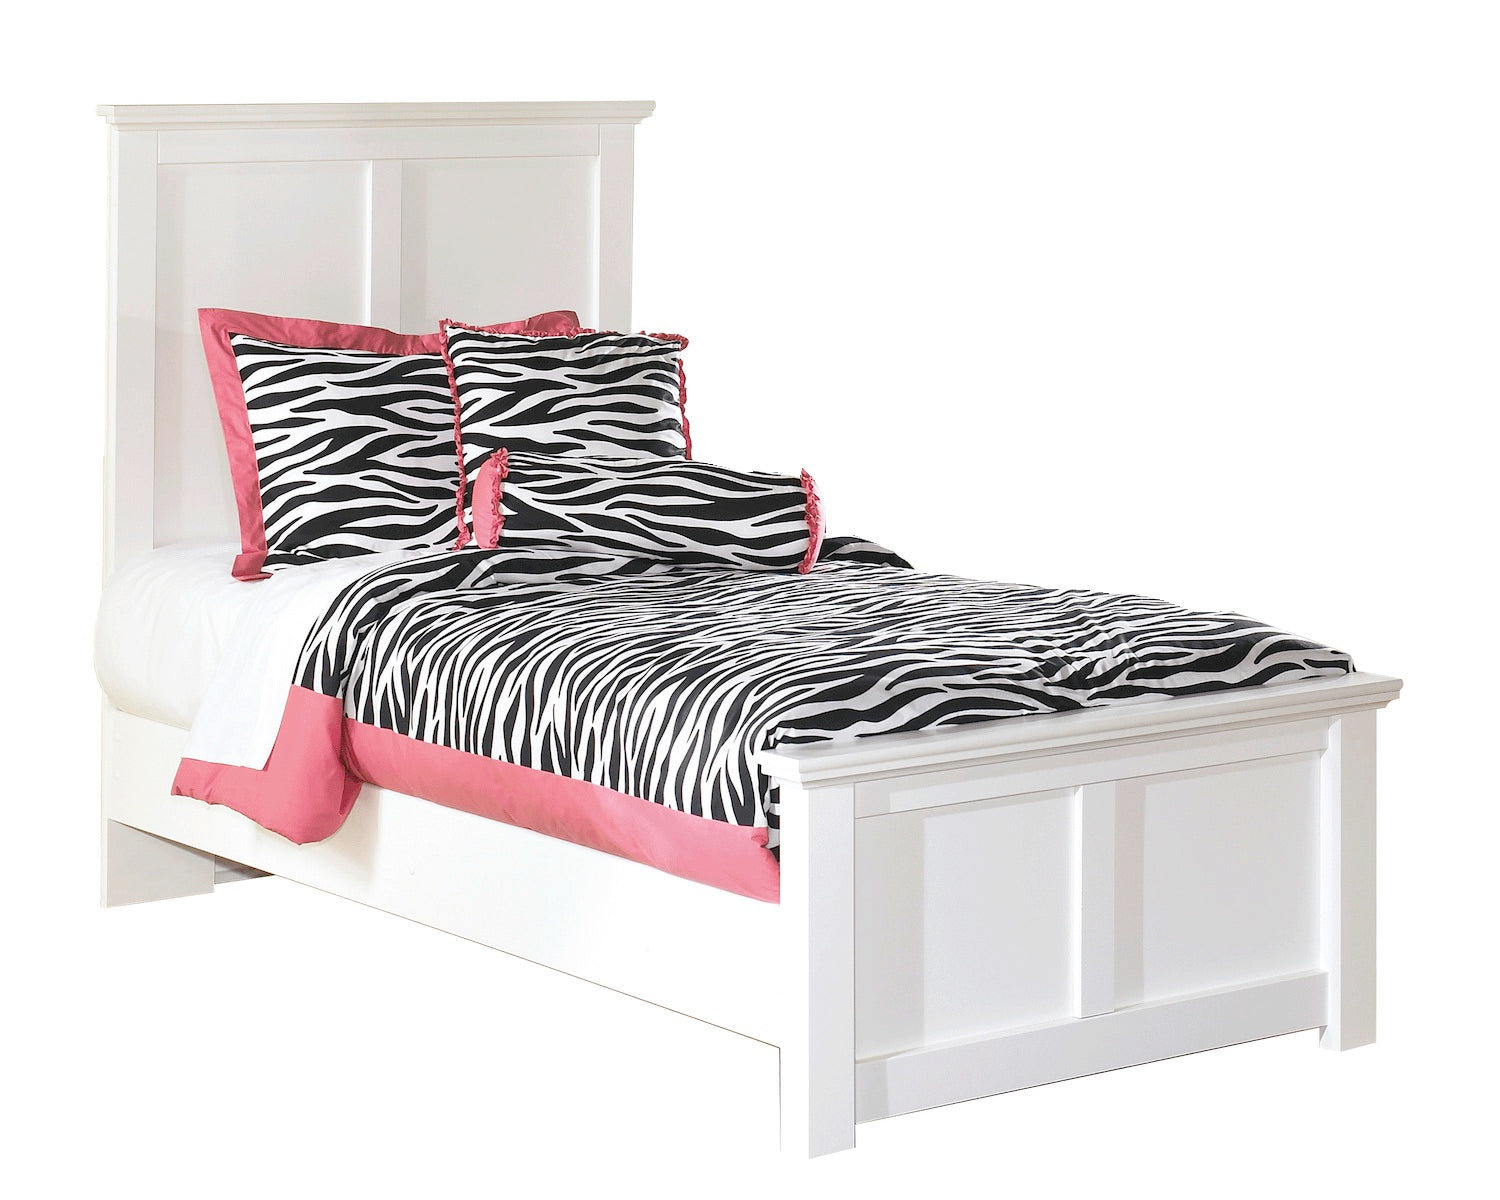 Ashley Bostwick Shoals 6 PC Twin Panel Bedroom Set with Two Nightstand & Chest in White - The Furniture Space.